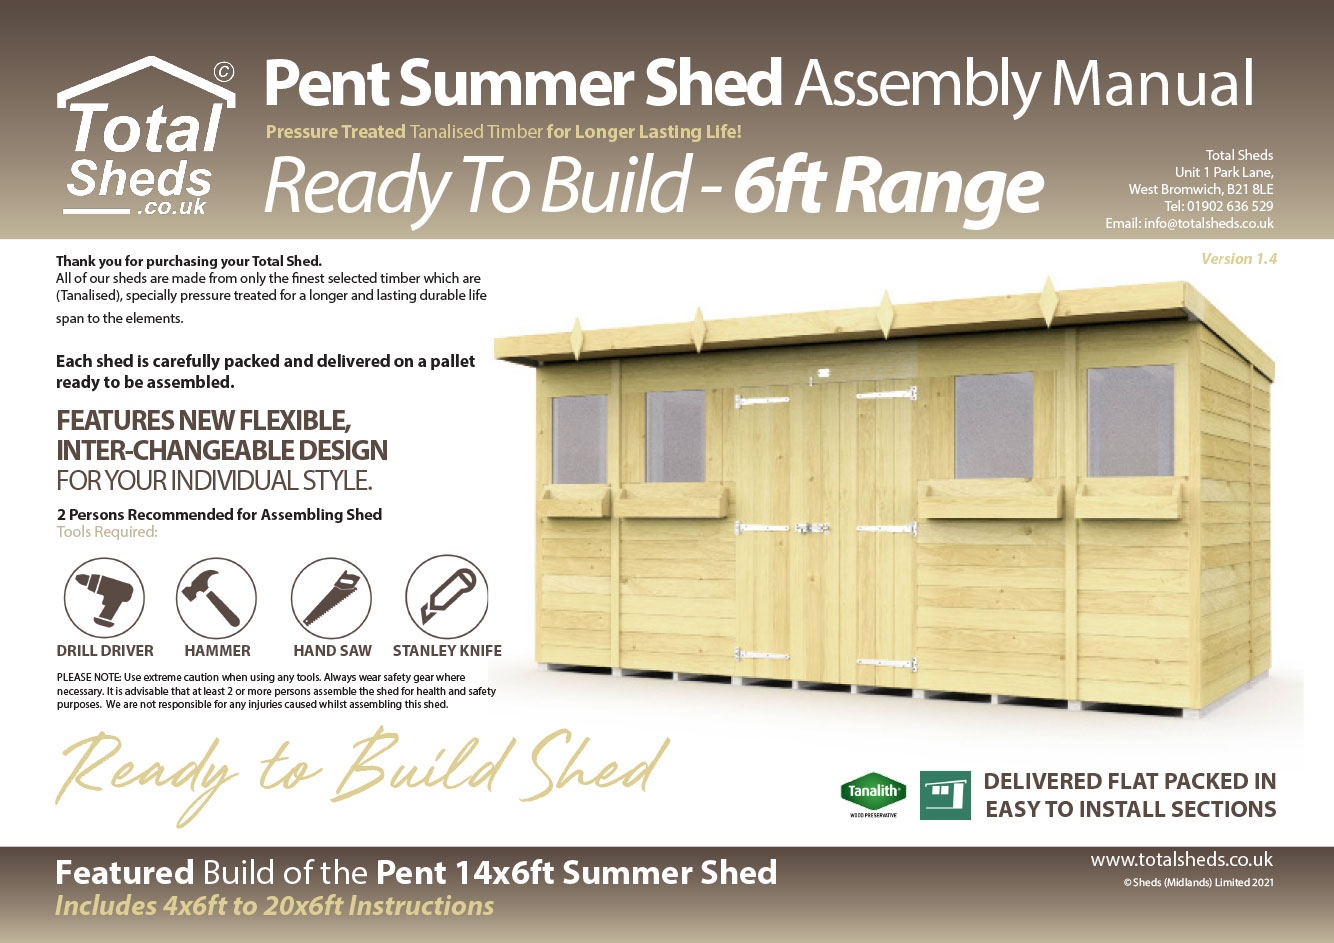 6ft Pent Summer Shed Installation Guide